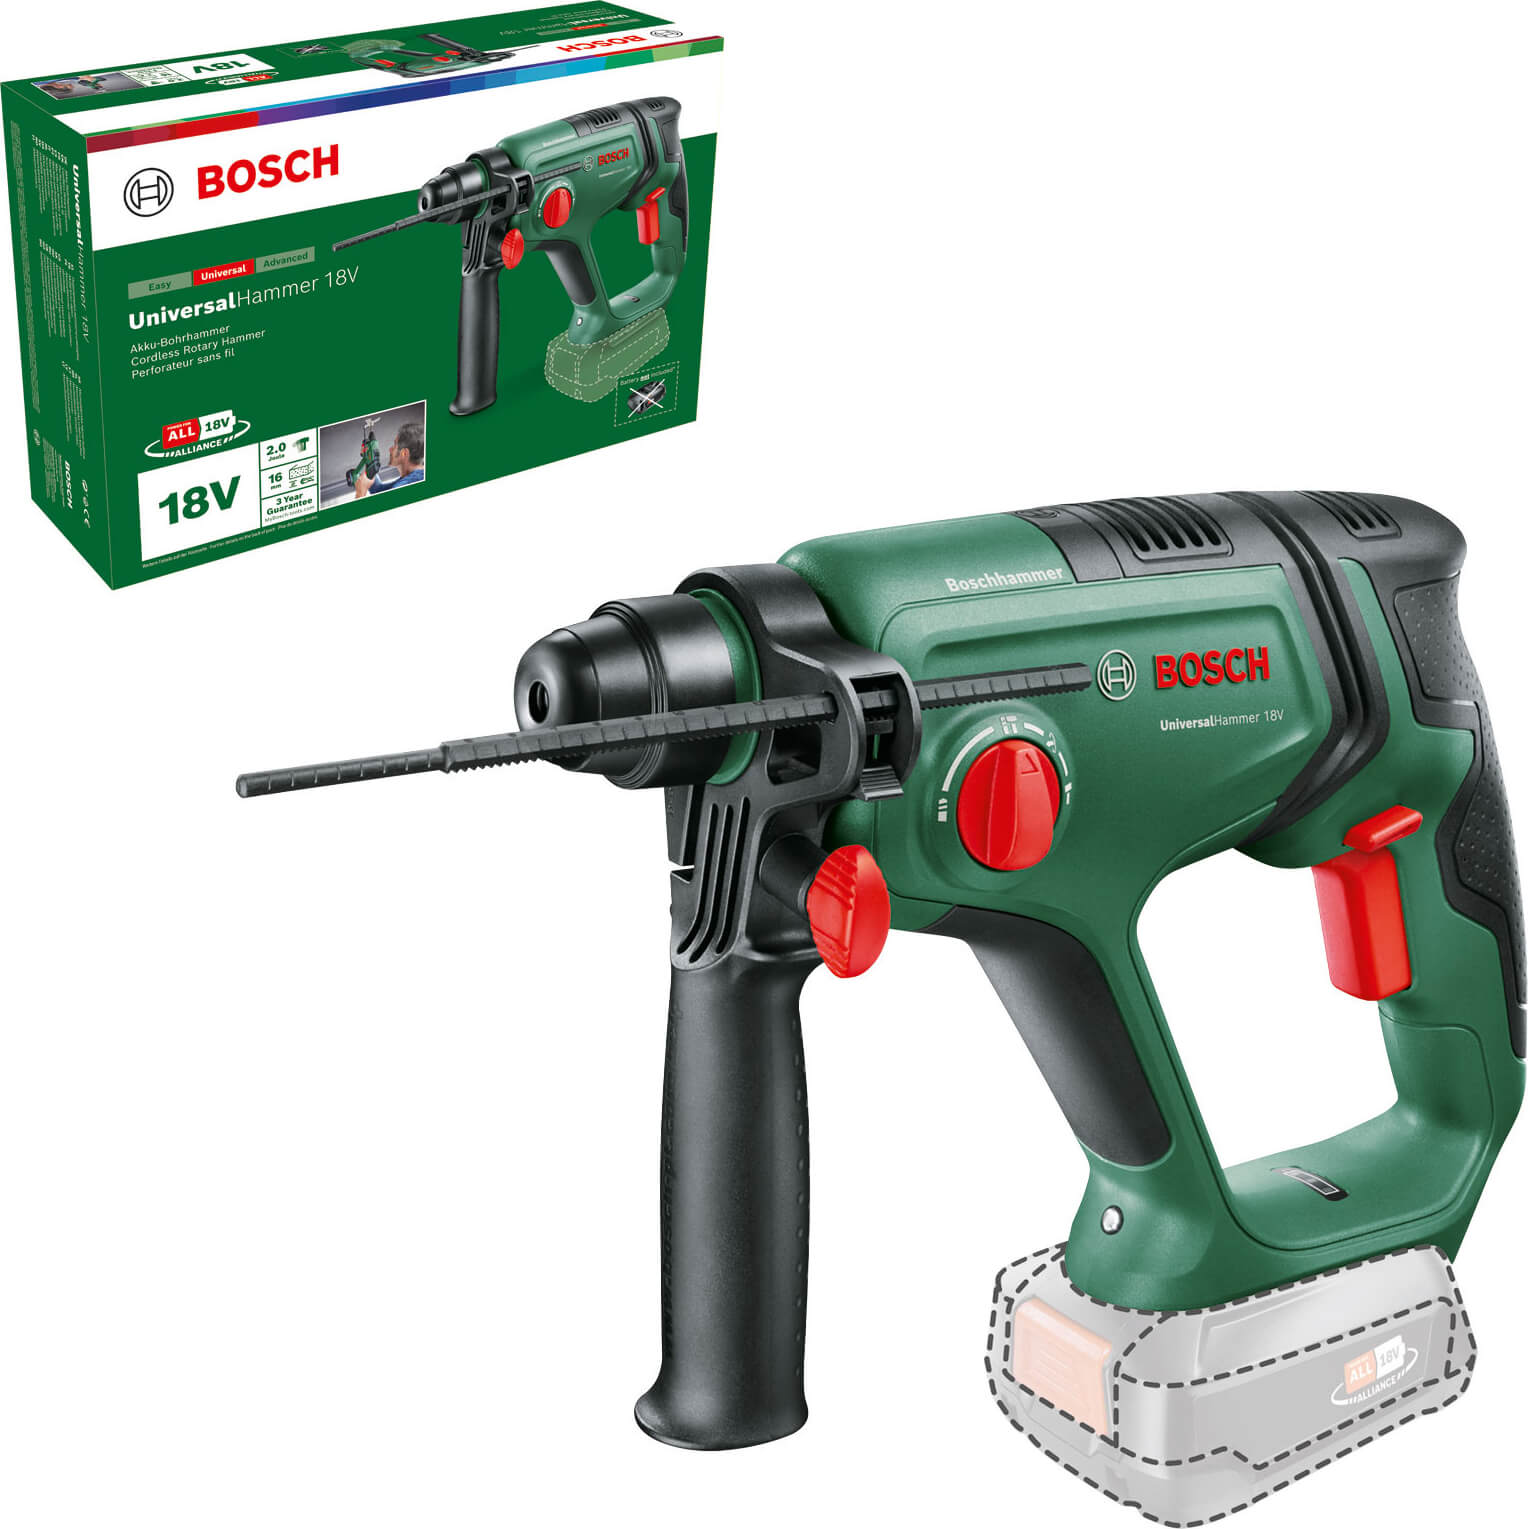 Image of Bosch UNIVERSALHAMMER 18v Cordless SDS Drill No Batteries No Charger No Case